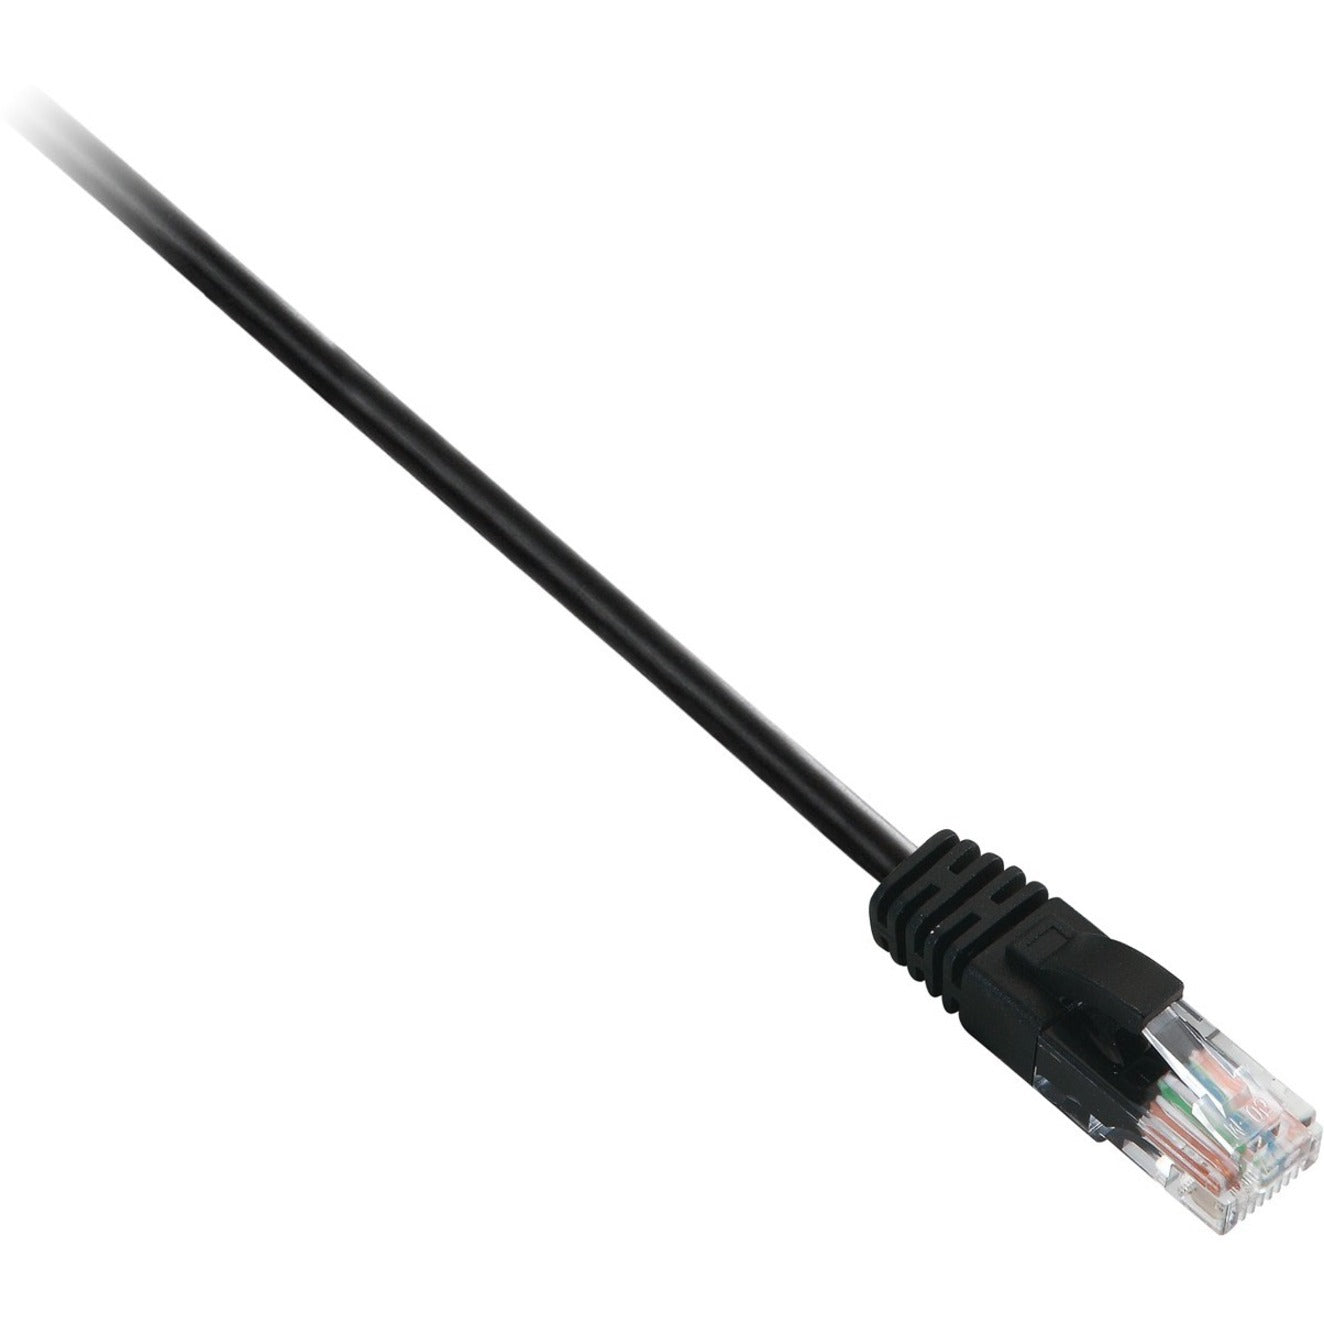 V7 V7CAT6UTP-05M-BLK-1E Black Cat6 Unshielded (UTP) Cable RJ45 Male to RJ45 Male 5m 16.4ft, Strain Relief, Booted, Molded, Noise Reducing, Crosstalk Protection, EMI/RF Protection, Locking Latch, 1 Gbit/s Data Transfer Rate